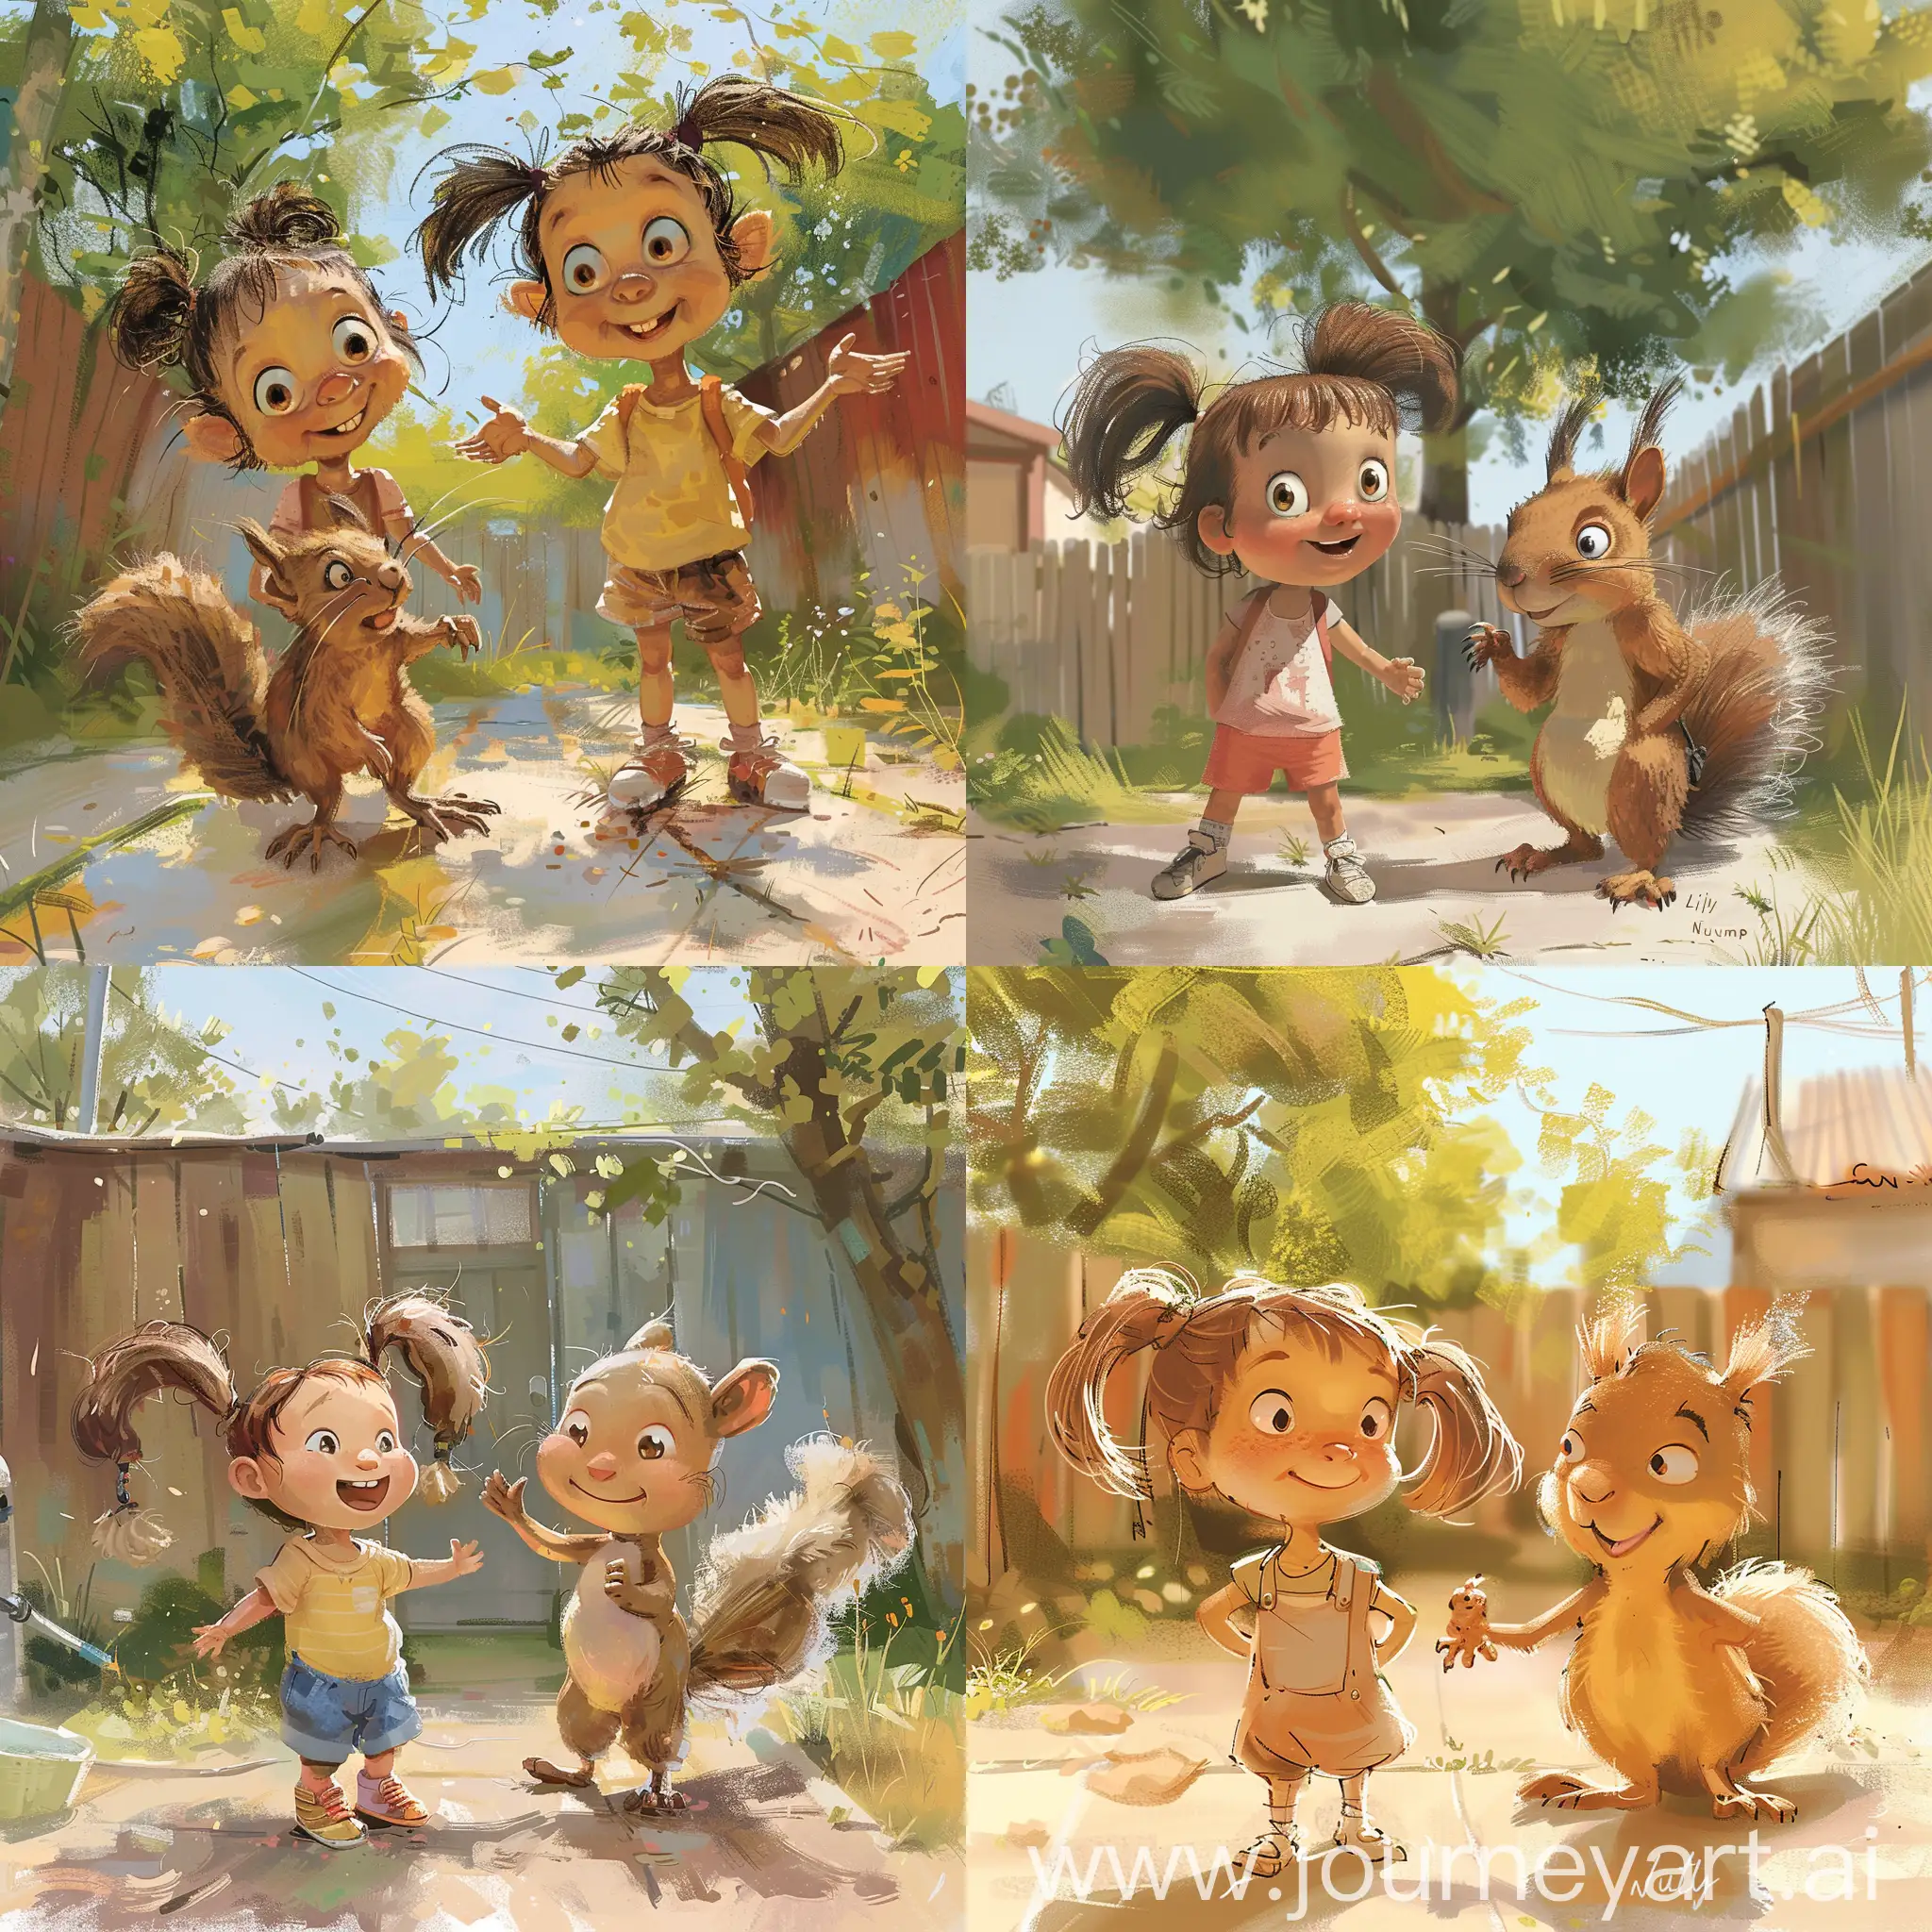 Illustrate two main characters for a kids' story. A joyful, curious little girl with pigtails named Lily and her best friend, a small, adventurous talking squirrel named Nutmeg. They are standing in a sunny backyard, ready to explore.